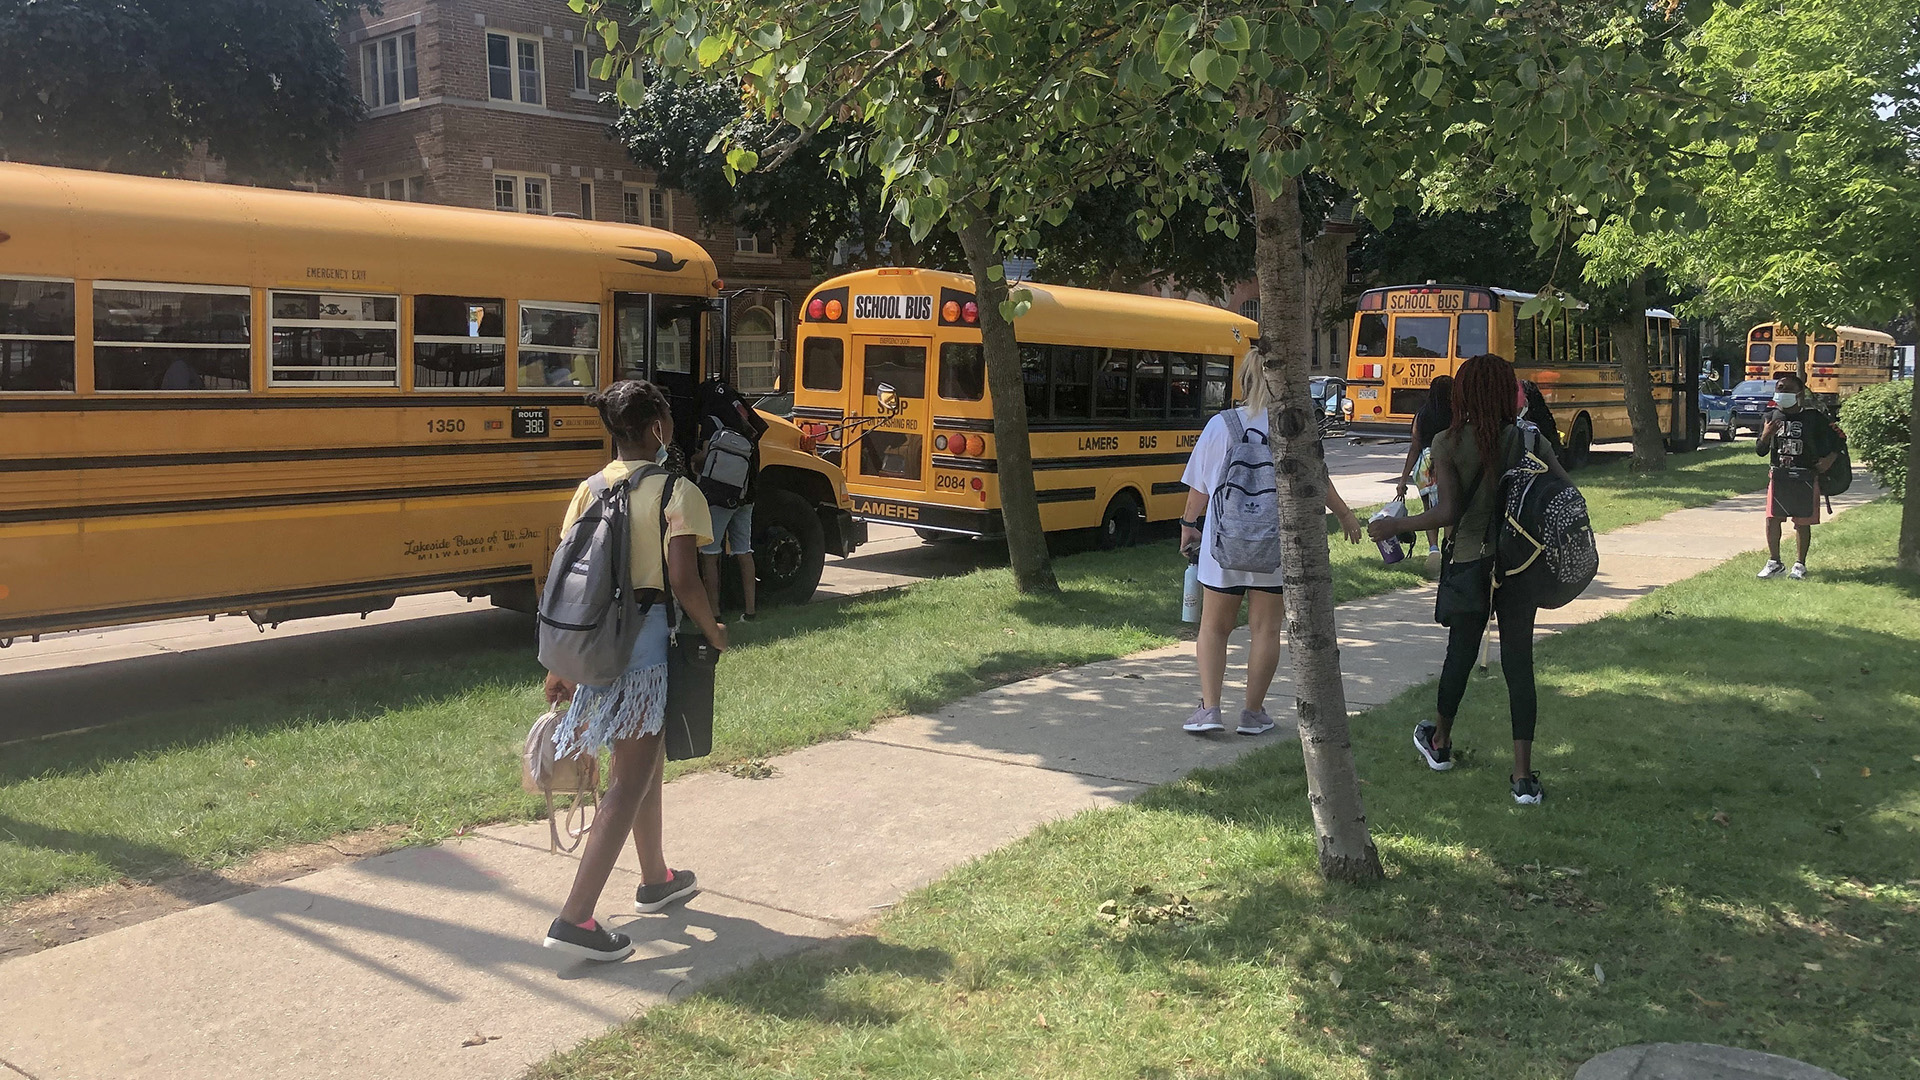 Multiple people stand on a sidewalk and lawn in the sunlight and in the shade of trees, in front of a row of school buses parked in front of a brick building.